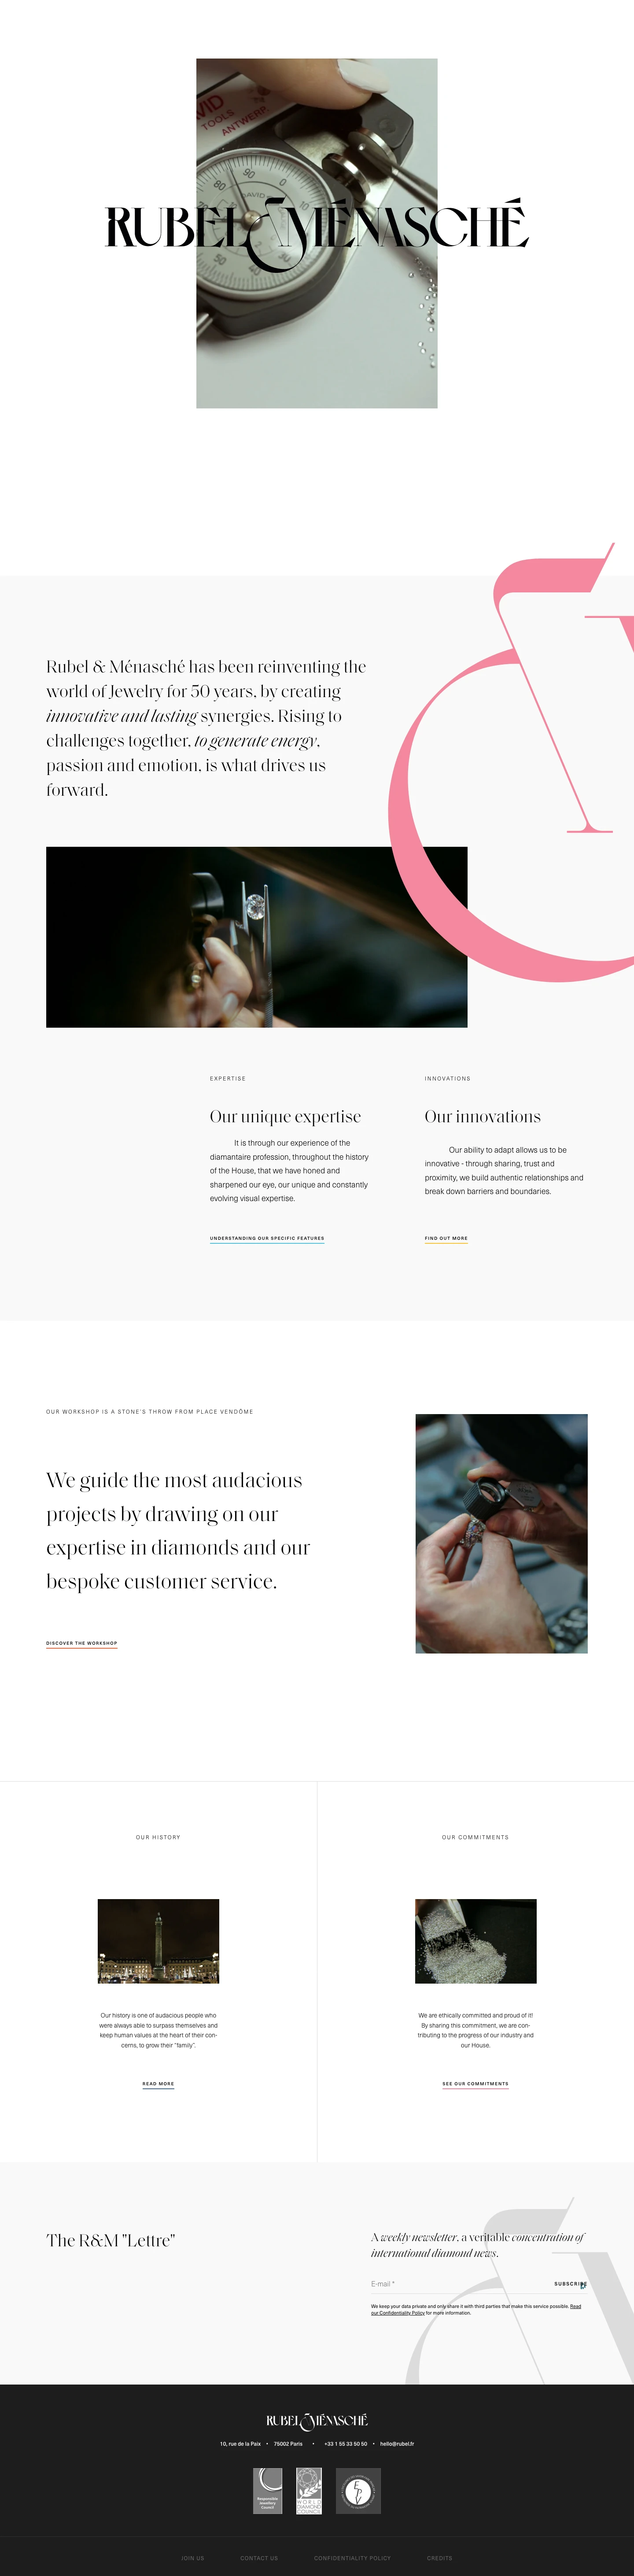 Rubel & Ménasché Landing Page Example: Rubel & Ménasché has been reinventing the world of Jewelry for 50 years, by creating innovative and lasting synergies.